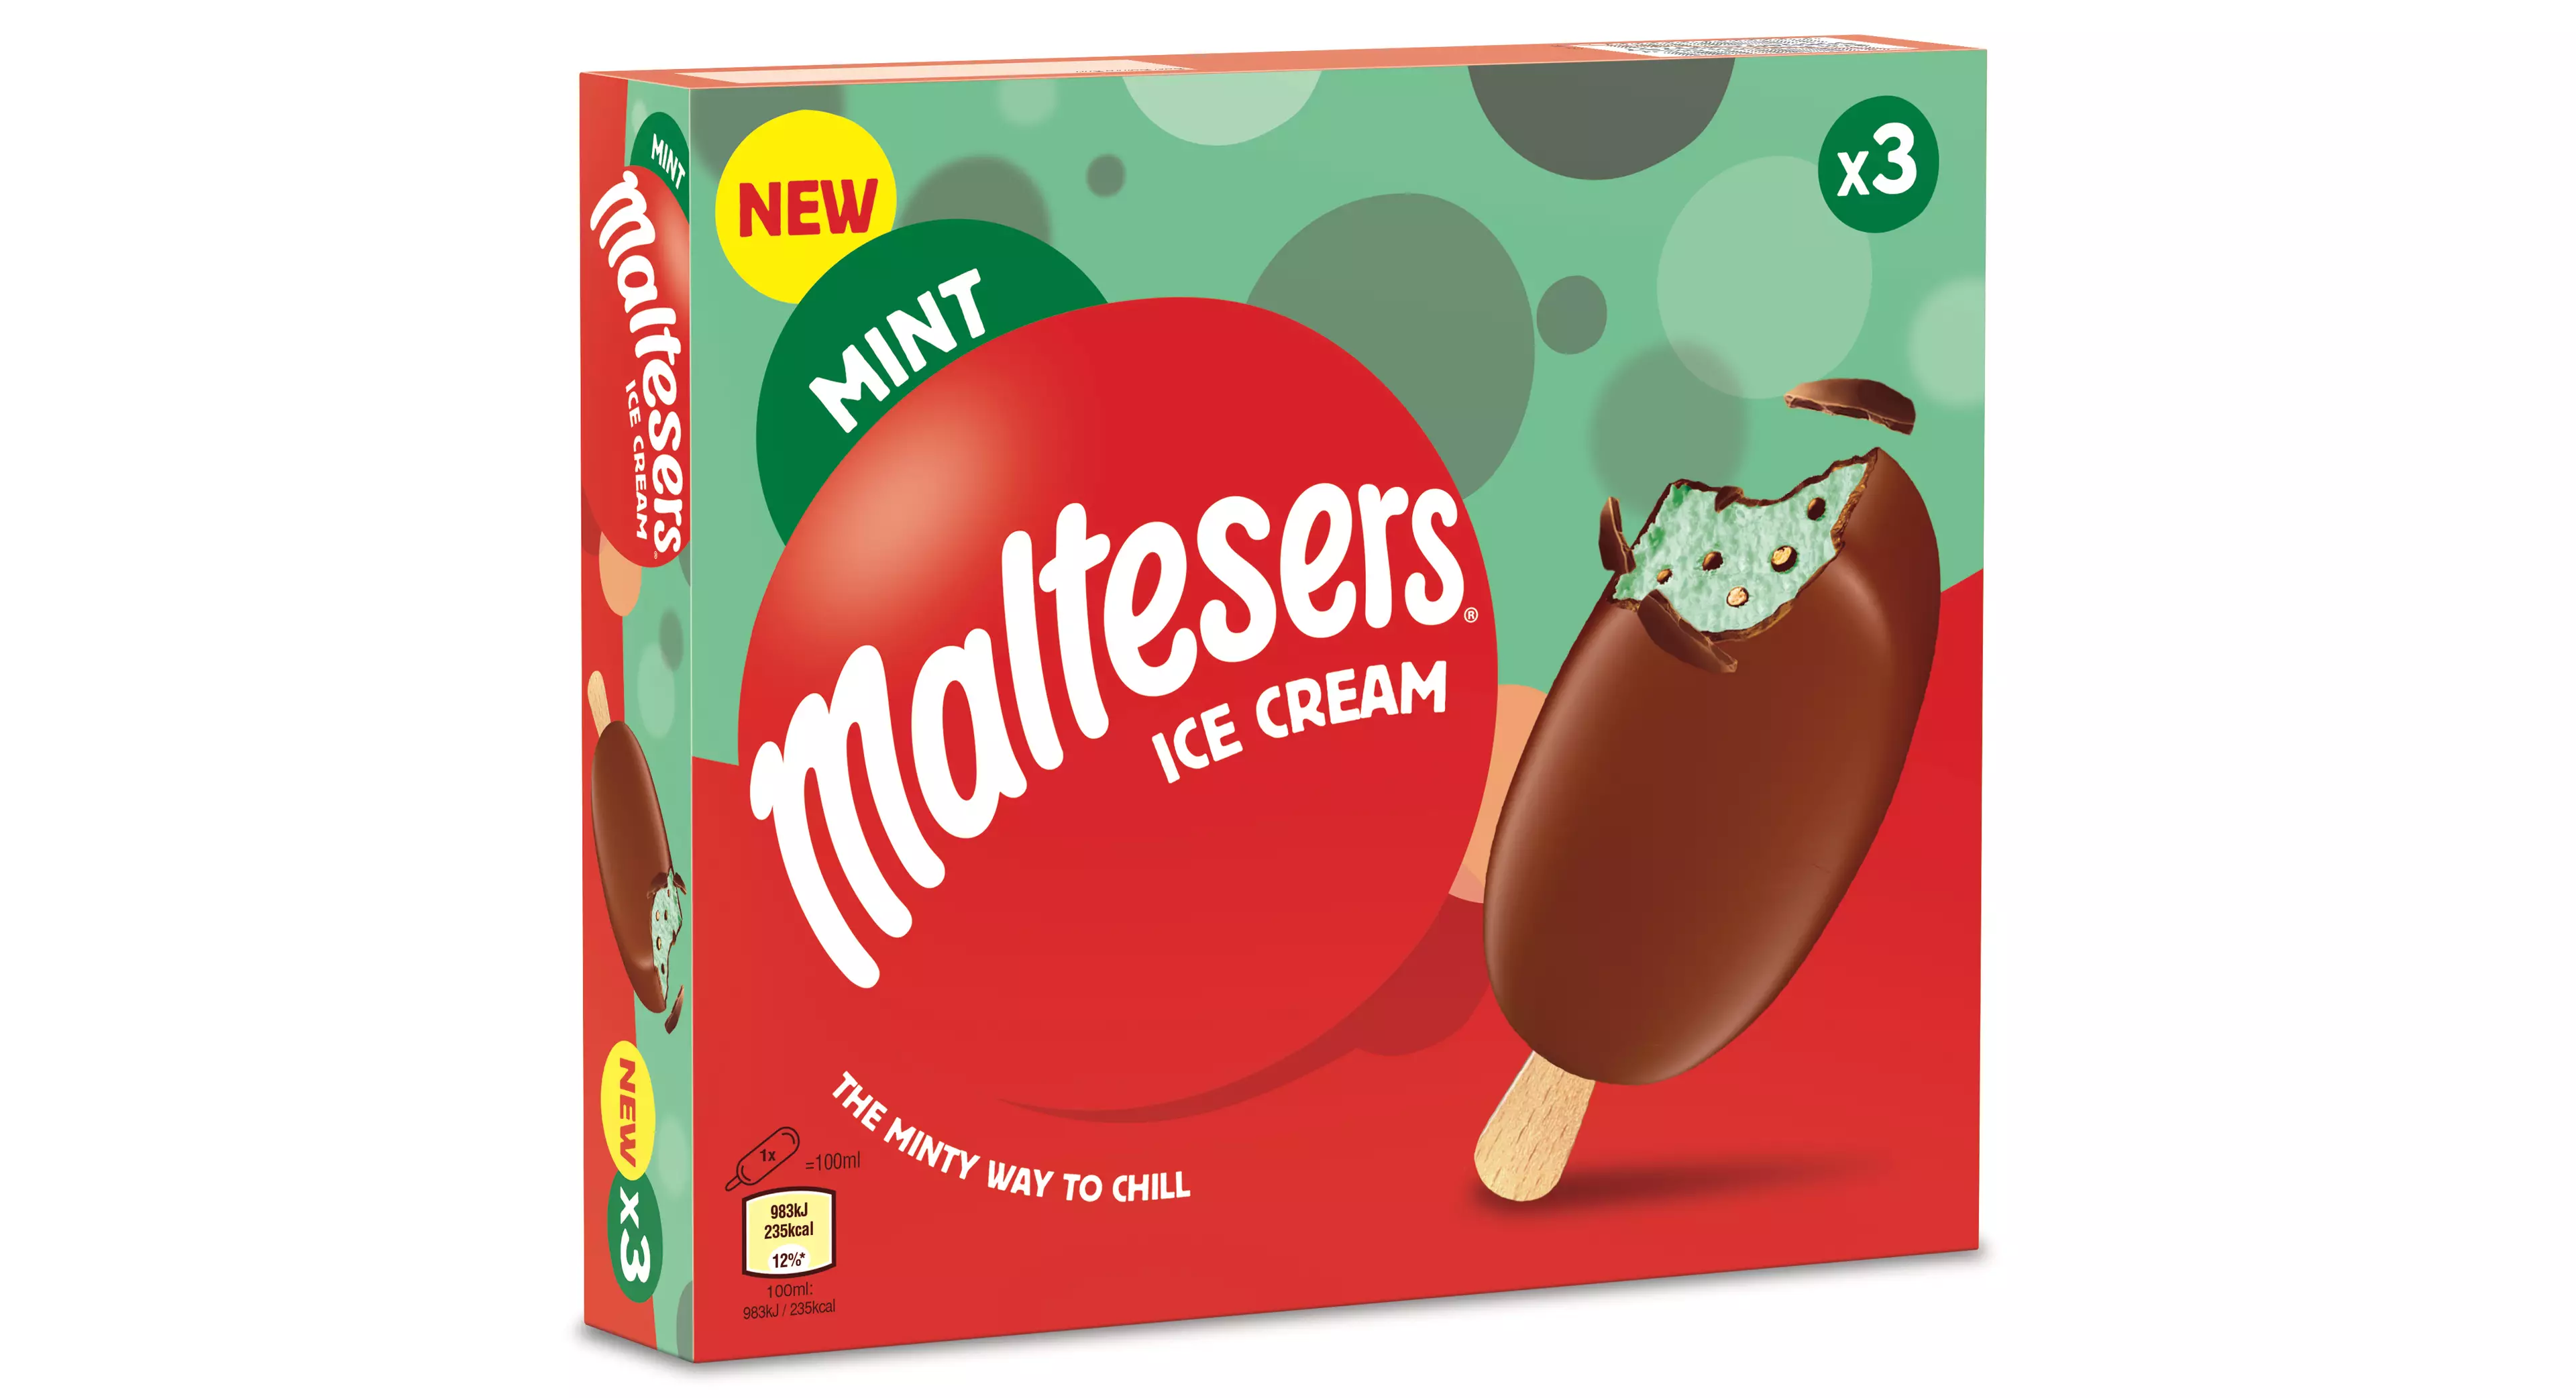 The ice-creams have only launched in Asda stores so far (